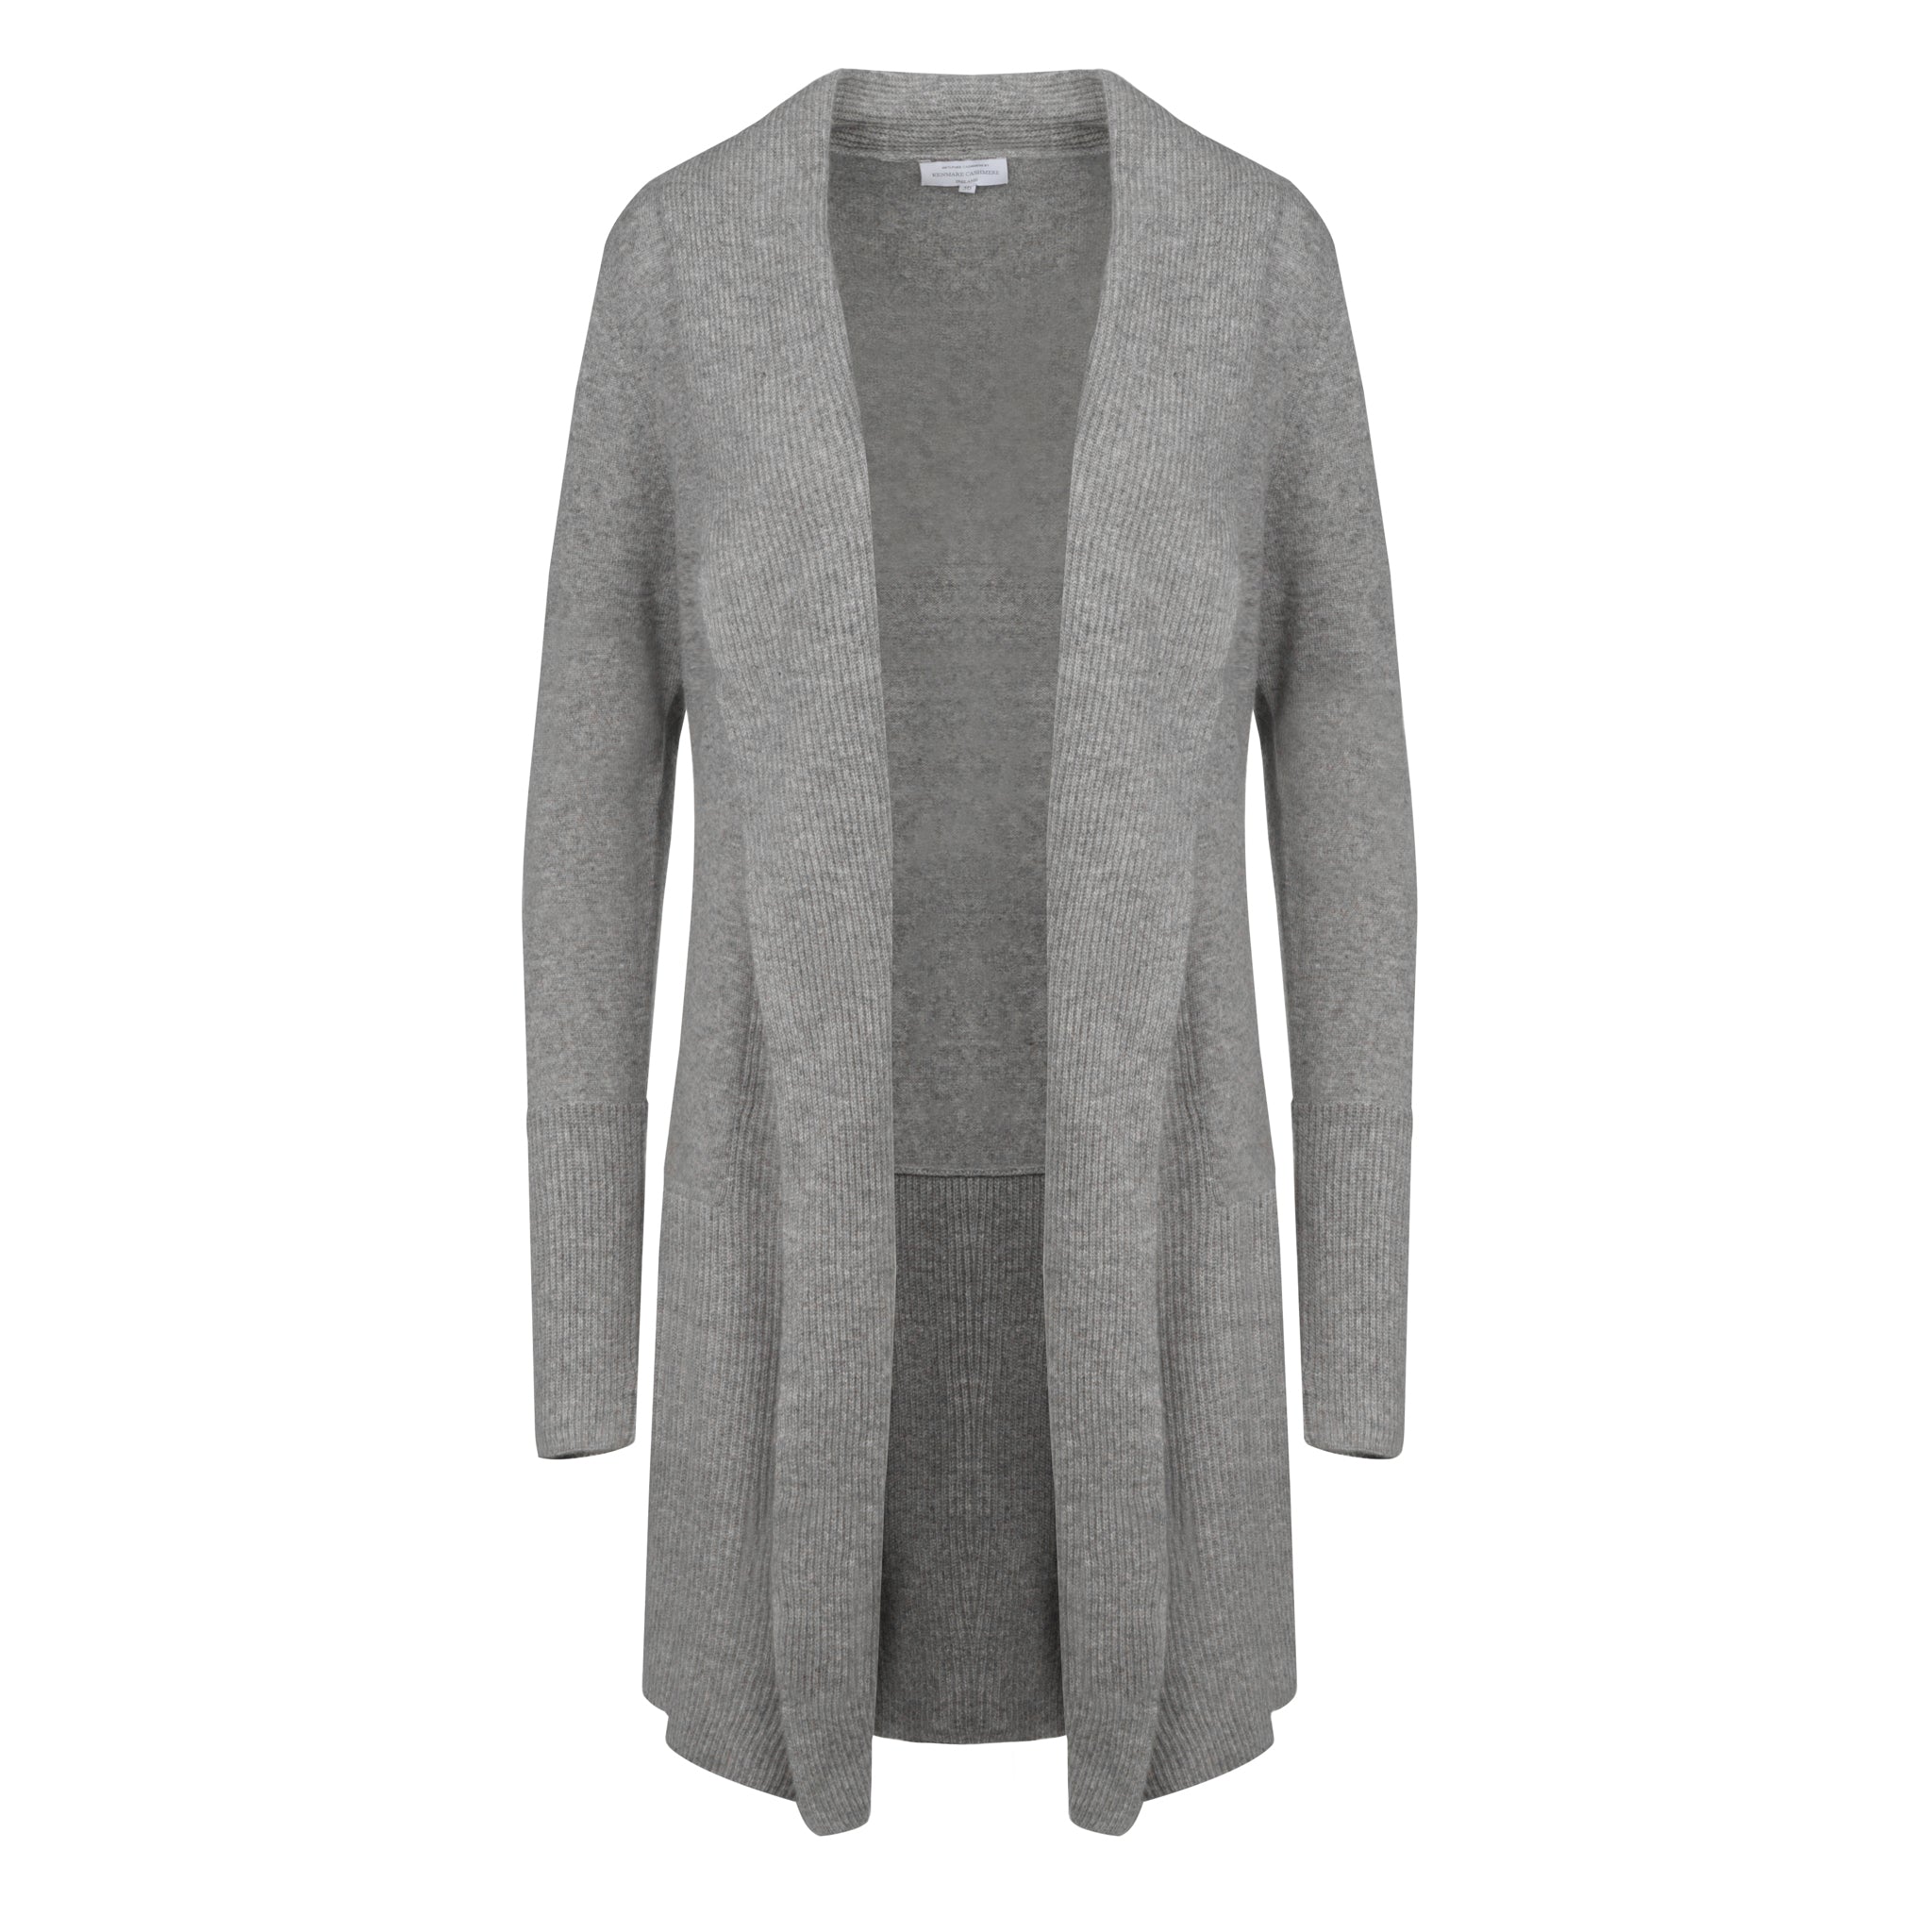 Cashmere Edge to Edge Cardigan in Silver Grey – Kenmare Cashmere